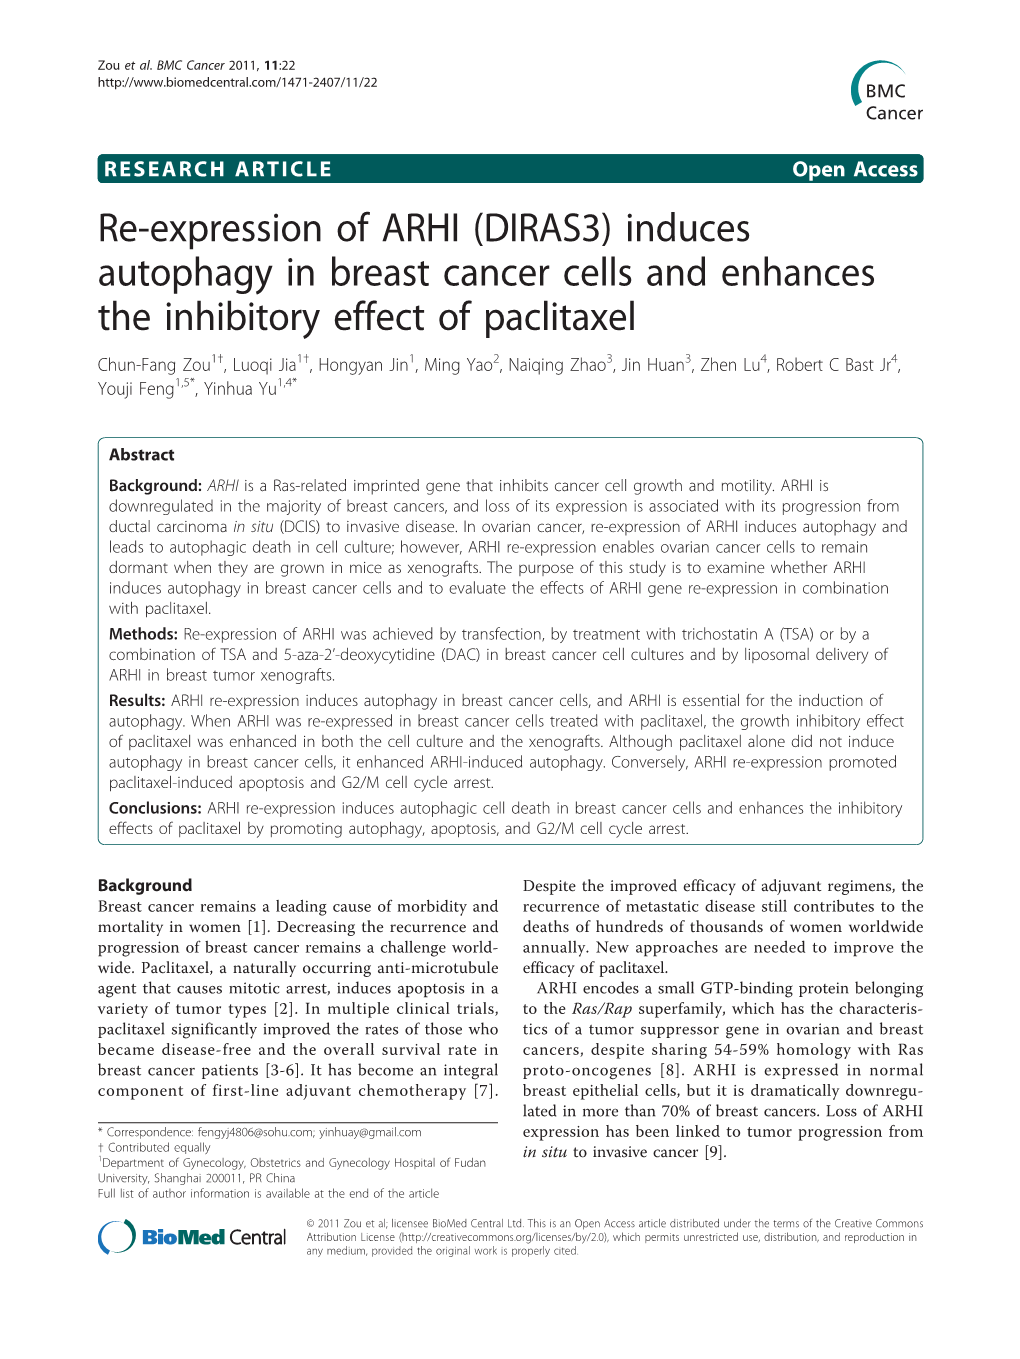 Re-Expression of ARHI (DIRAS3) Induces Autophagy in Breast Cancer Cells and Enhances the Inhibitory Effect of Paclitaxel